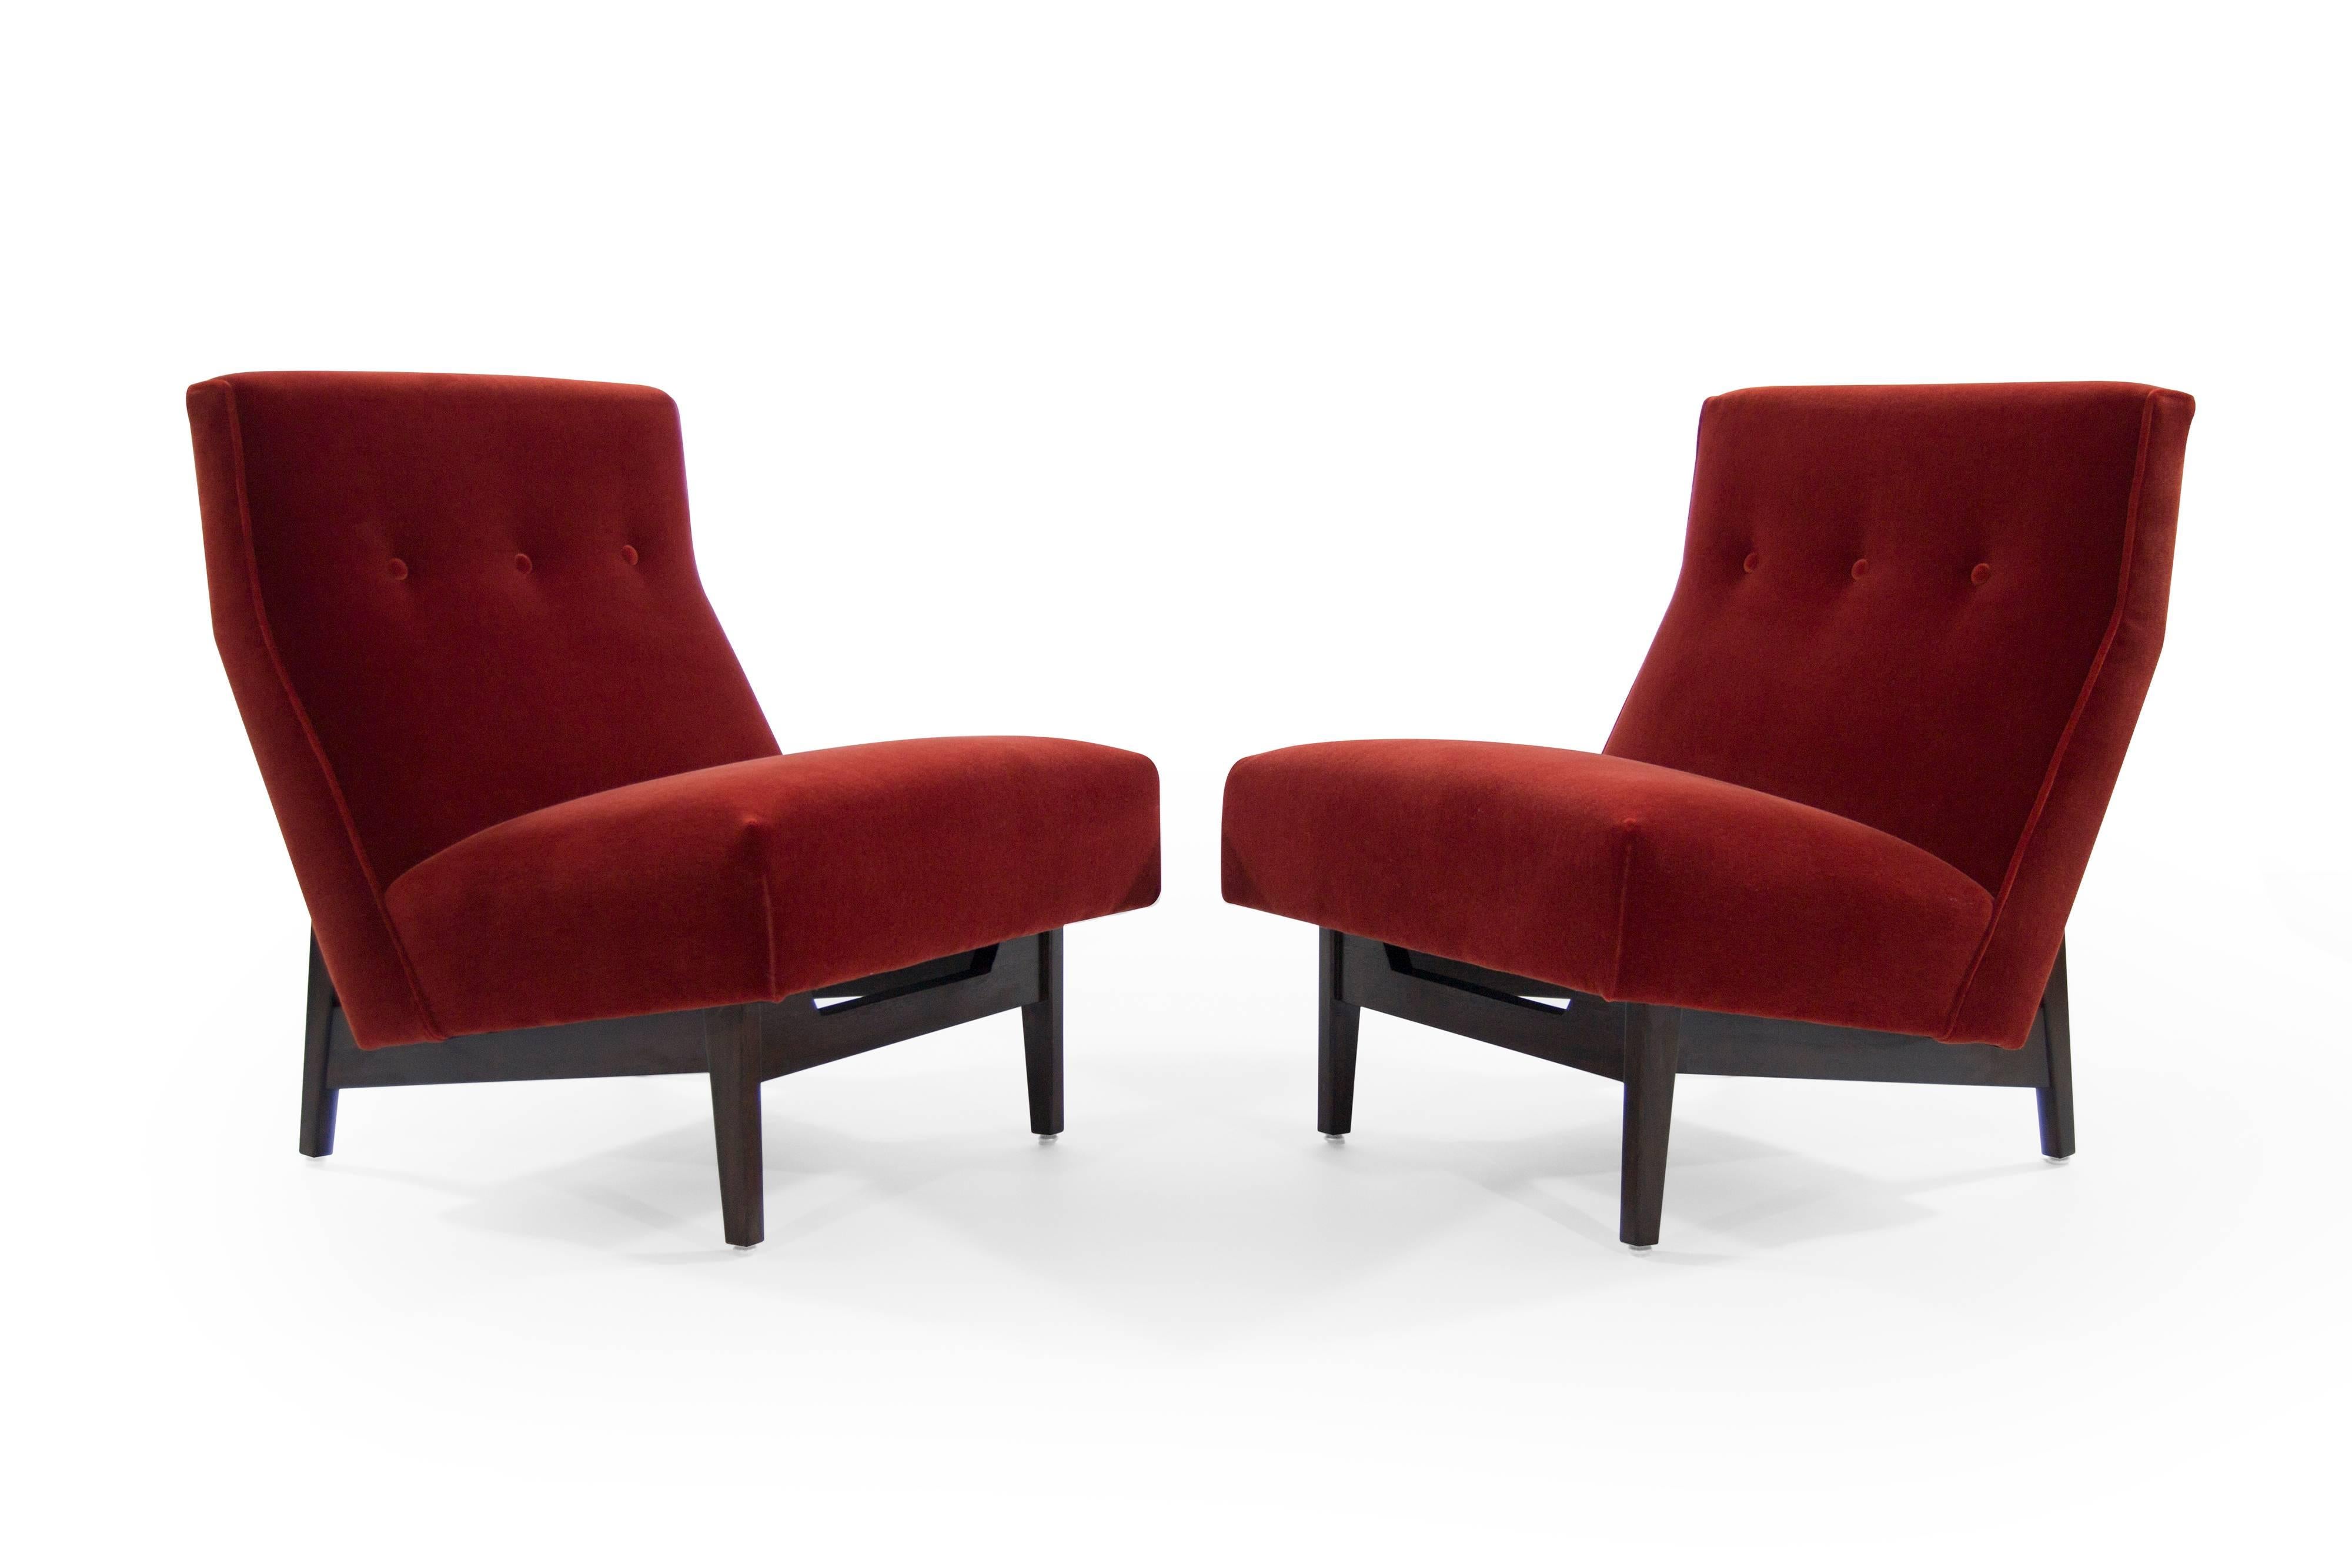 Pair of Jens Risom slipper chairs by Jens Risom, Inc. Walnut bases fully restored, newly upholstered in rust red mohair.